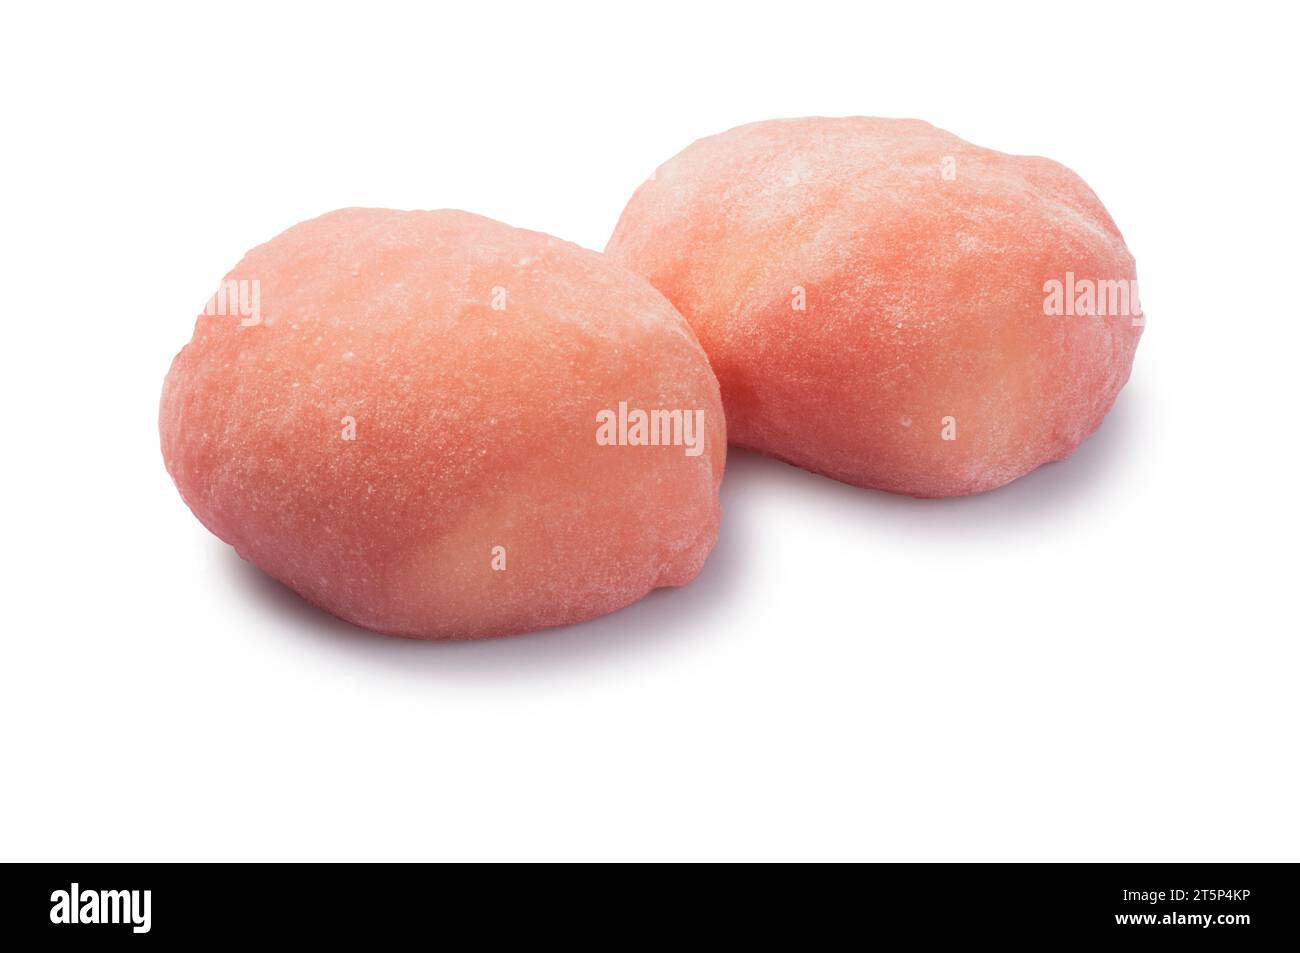 Studio shot of strawberry cheesecake style mochi cut out against a white background - John Gollop Stock Photo